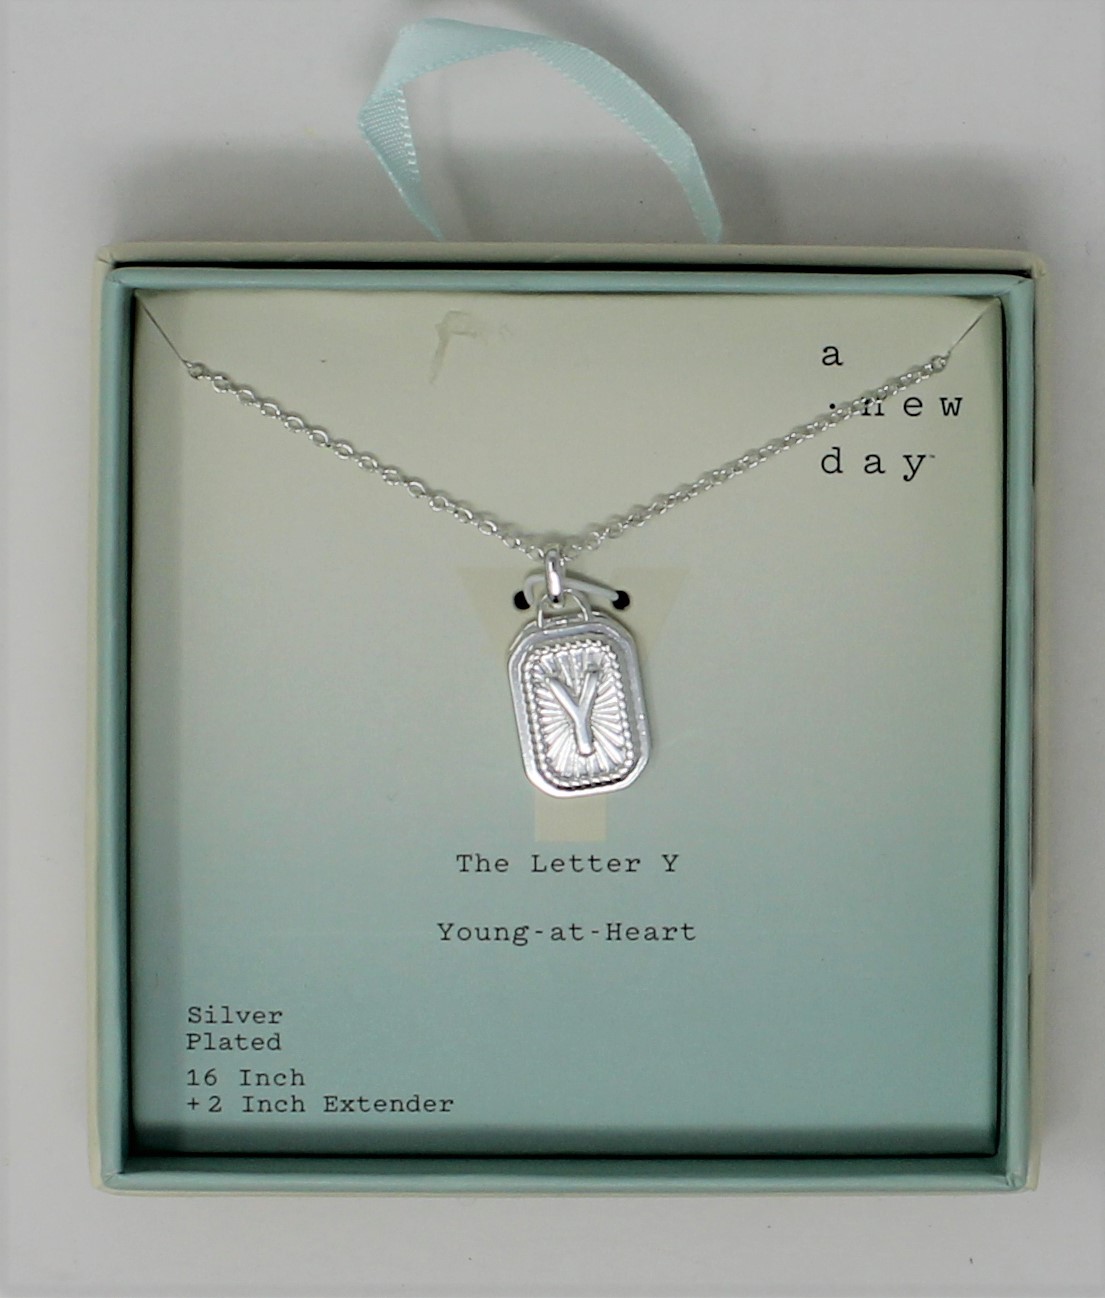 "Y" YOUNG - AT - HEART SILVER PLATED 16 INCH NECKLACE + 2 INCH EXTENDER - Click Image to Close